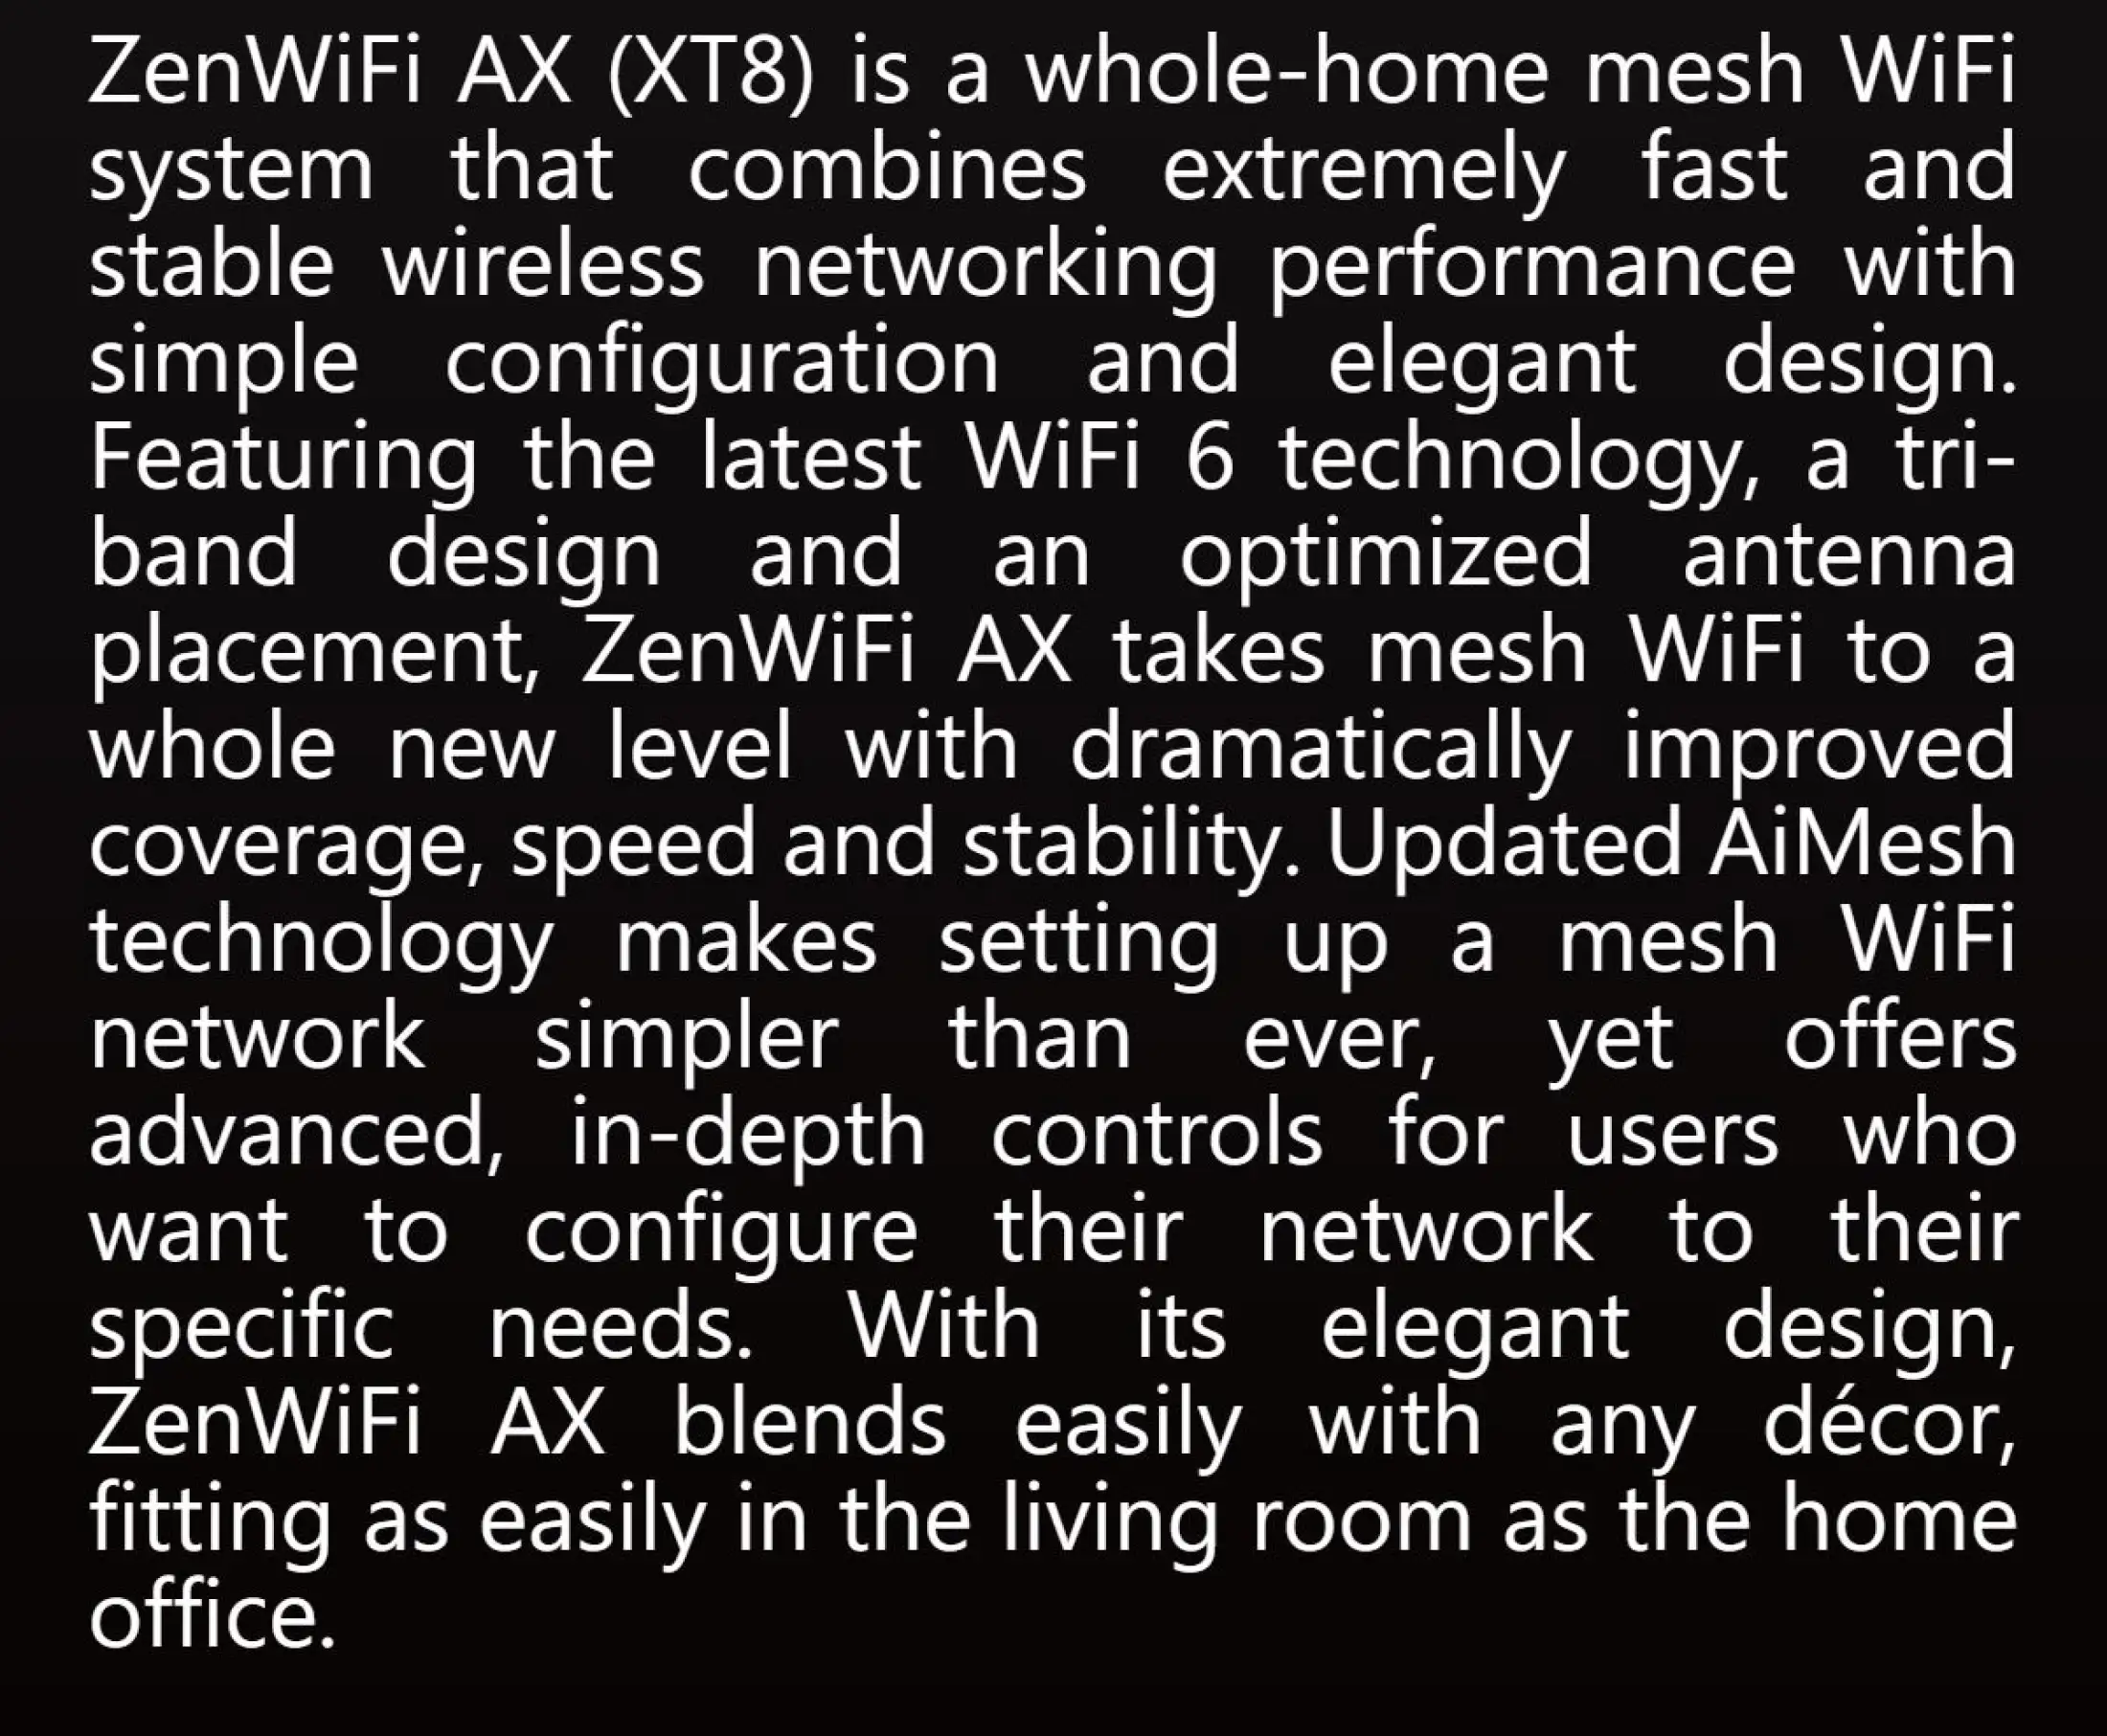 Asus Zenwifi Ax Xt8 Tri Band Whole Home Mesh Wifi Router System 2 Pack Wifi 6 802 11ax Up To 5500 Sq Ft 50 Devices Aimesh Lifetime Free Internet Security Parental Controls Easy